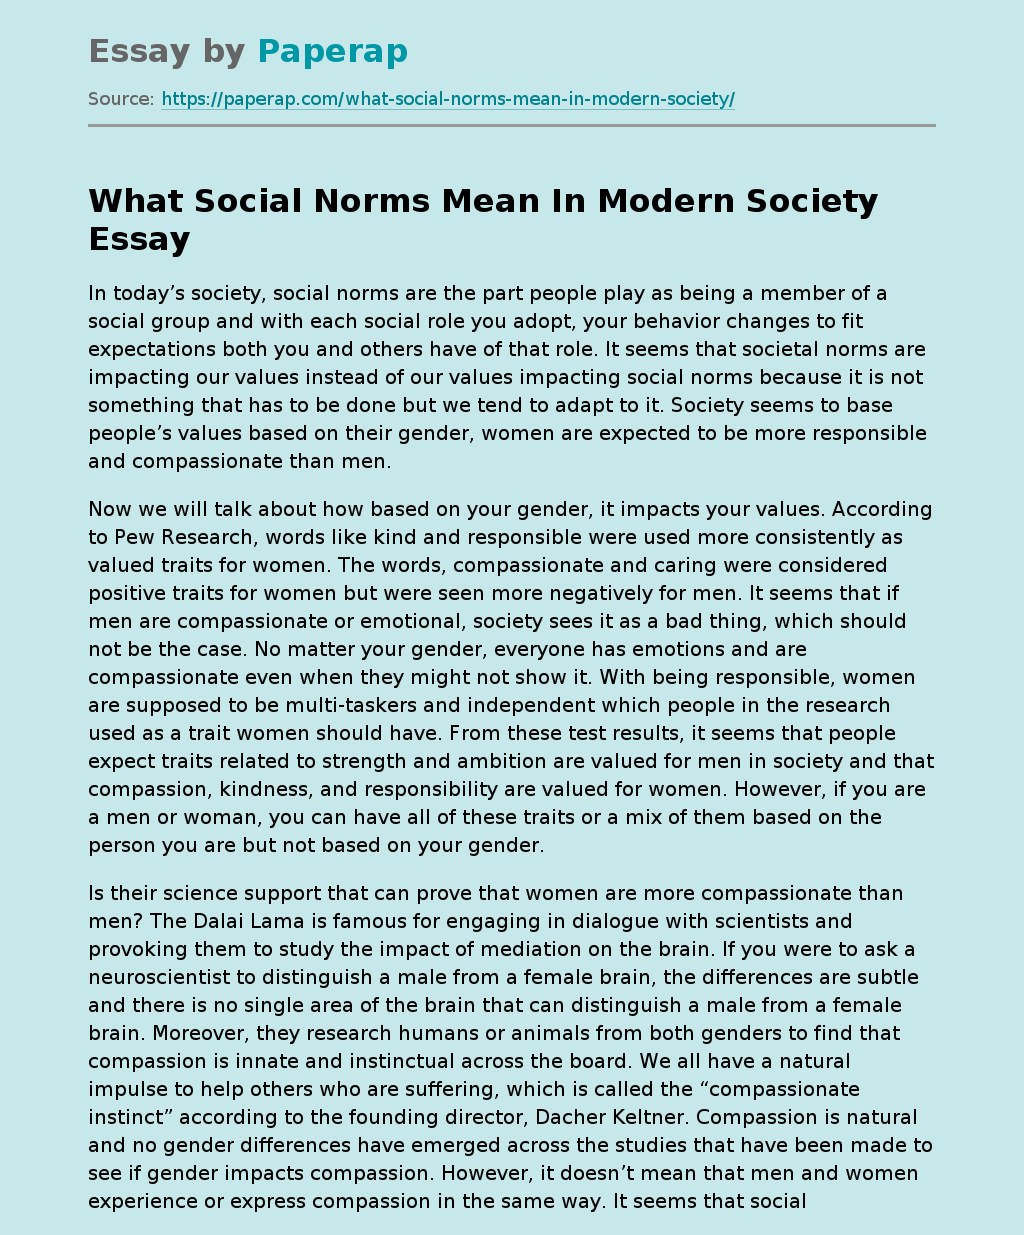 What Social Norms Mean In Modern Society